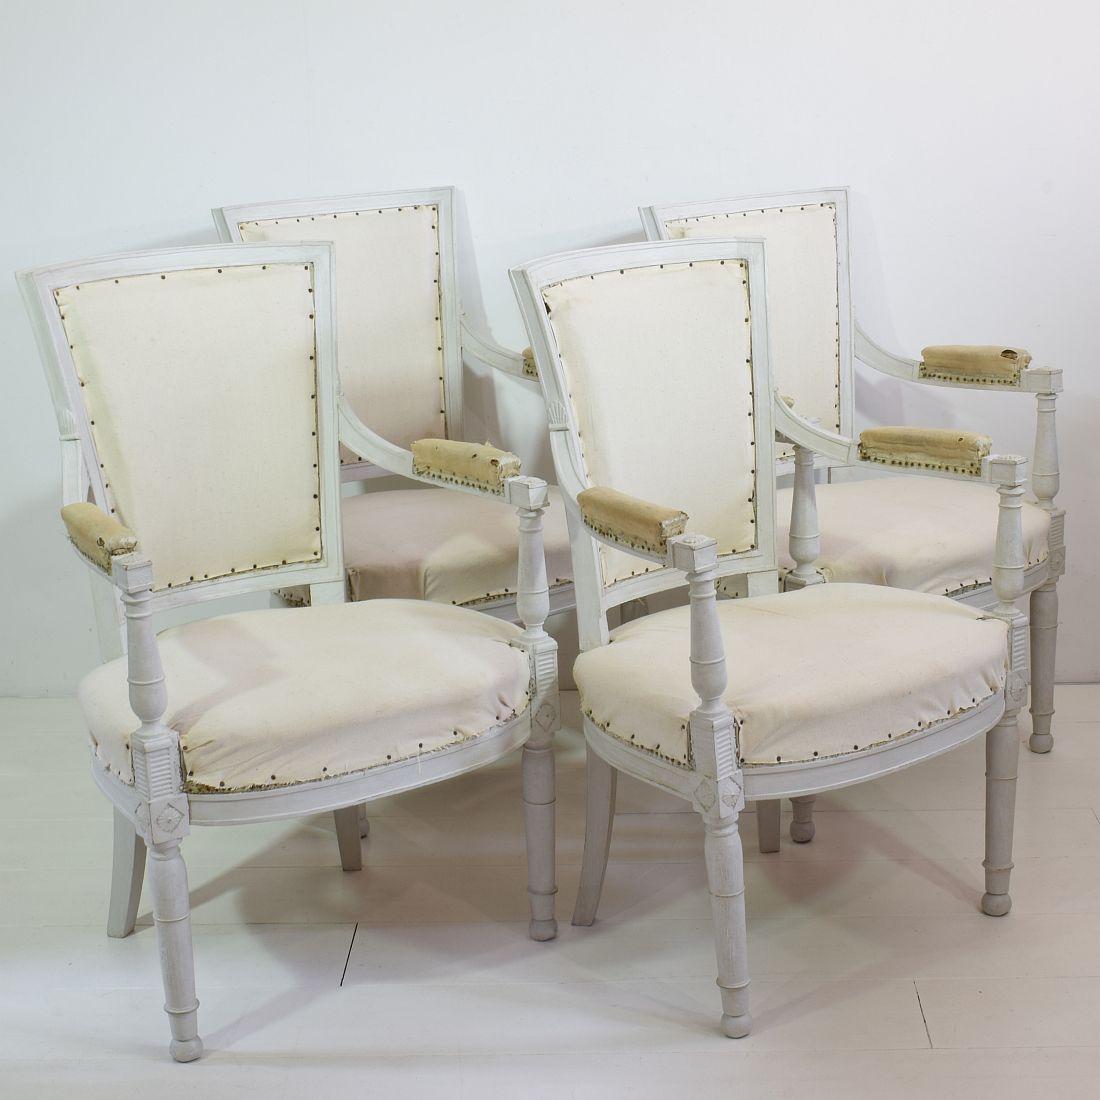 Hand-Crafted Set of 4 French 18th Century Directoire Chairs